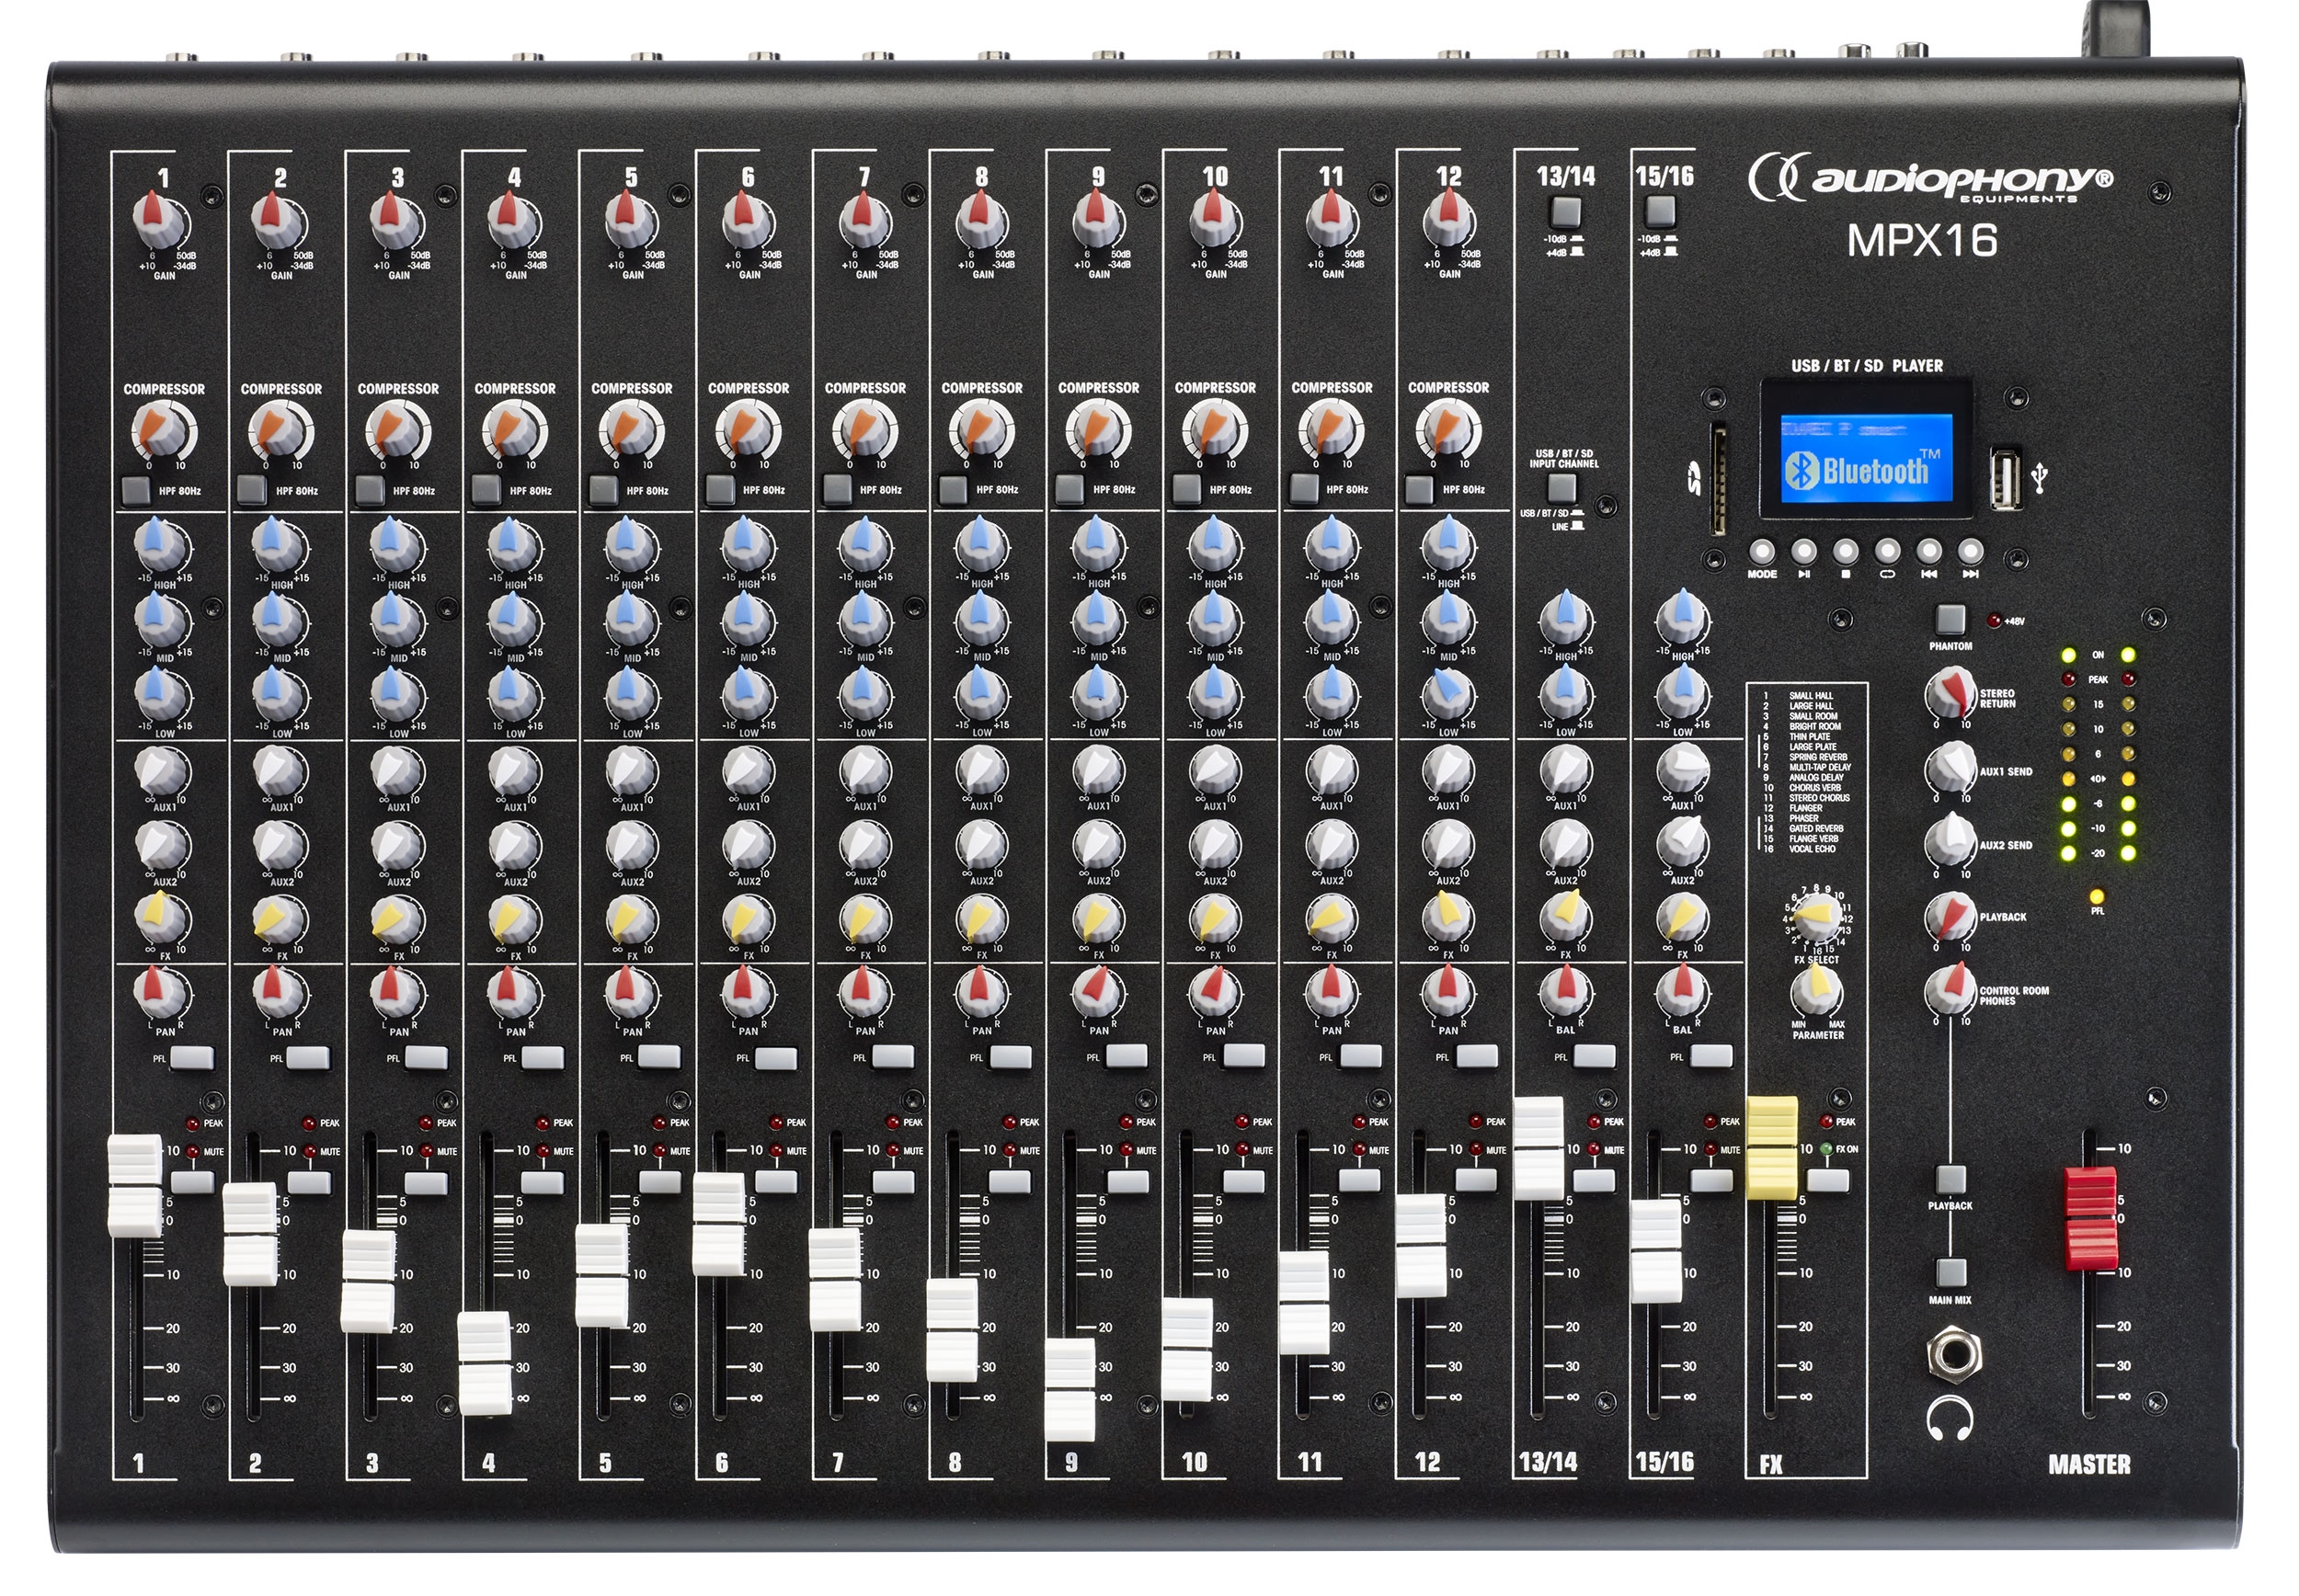 16 channel mixer with compressor, effects and USB / SD / Bluetooth Player